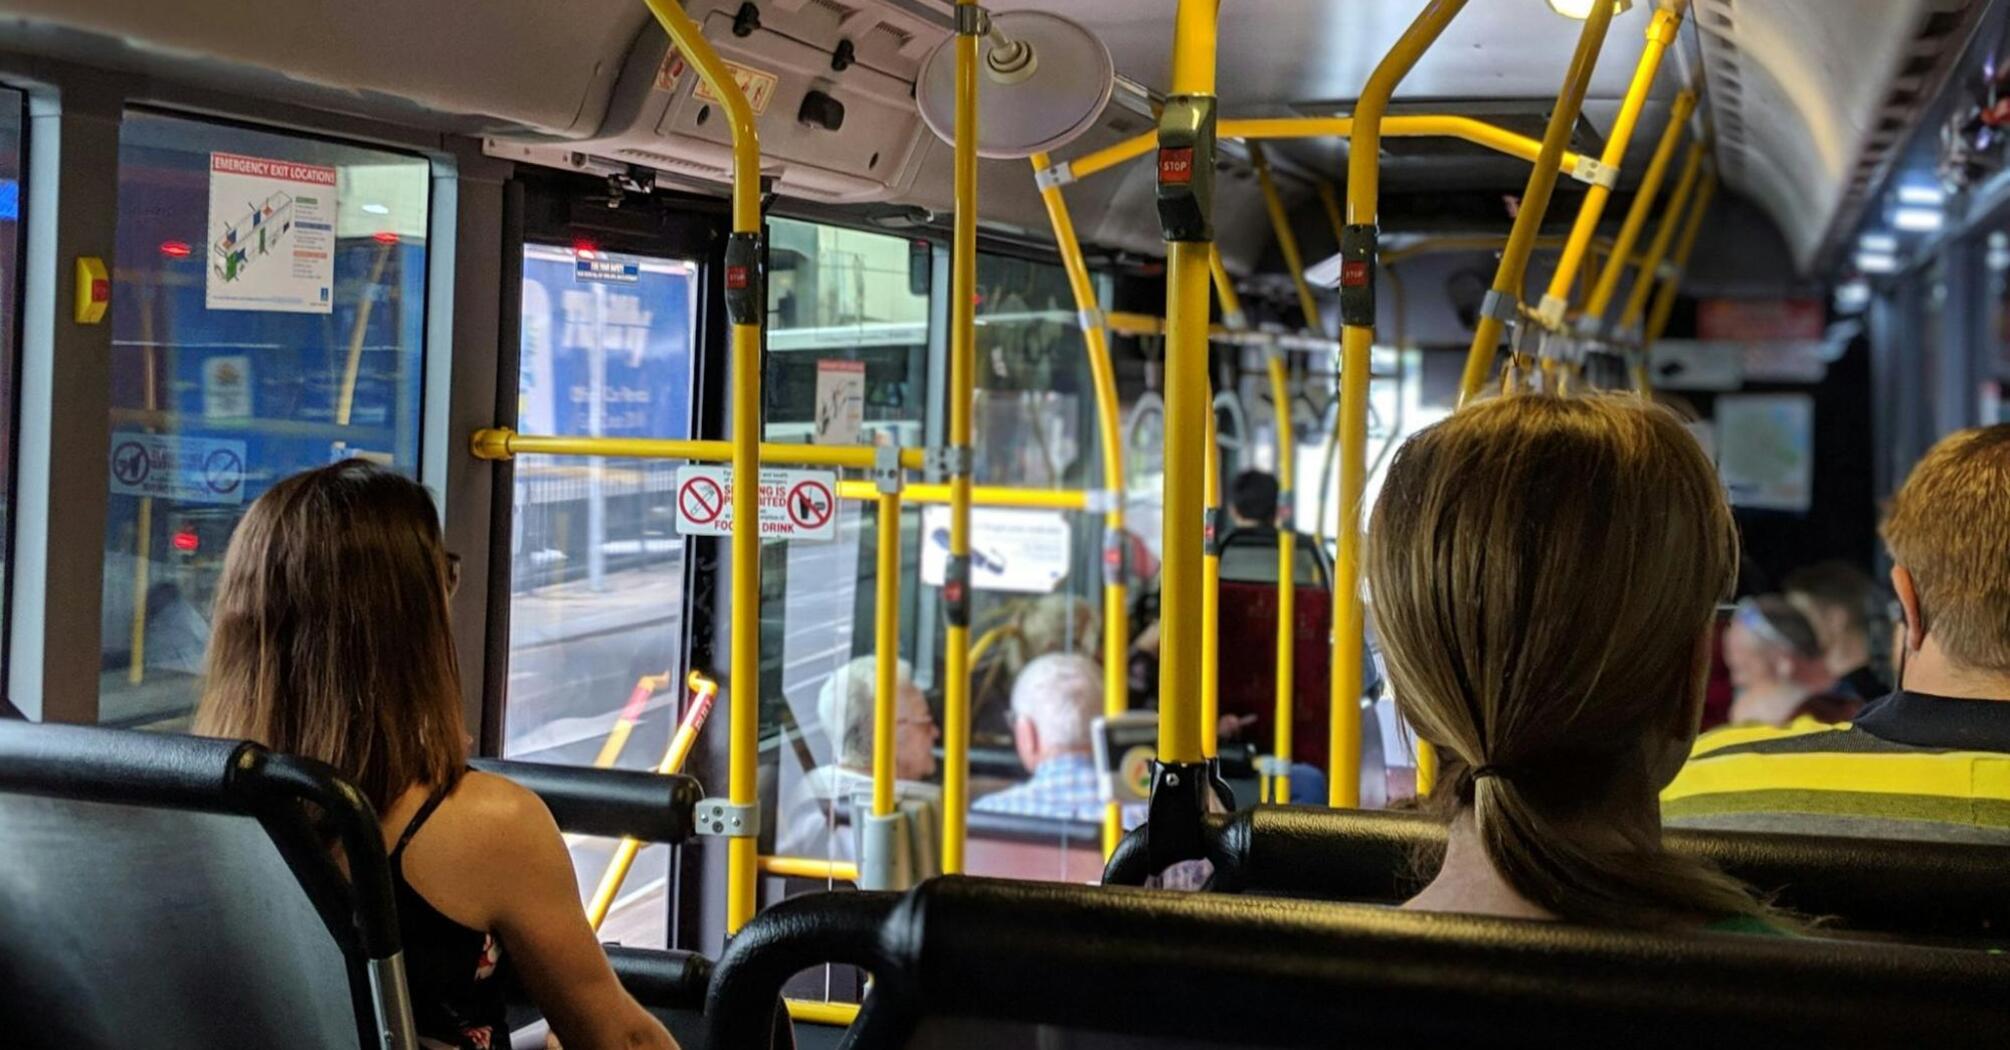 Passengers sitting inside a bus with yellow handrails and windows showing city streets outside